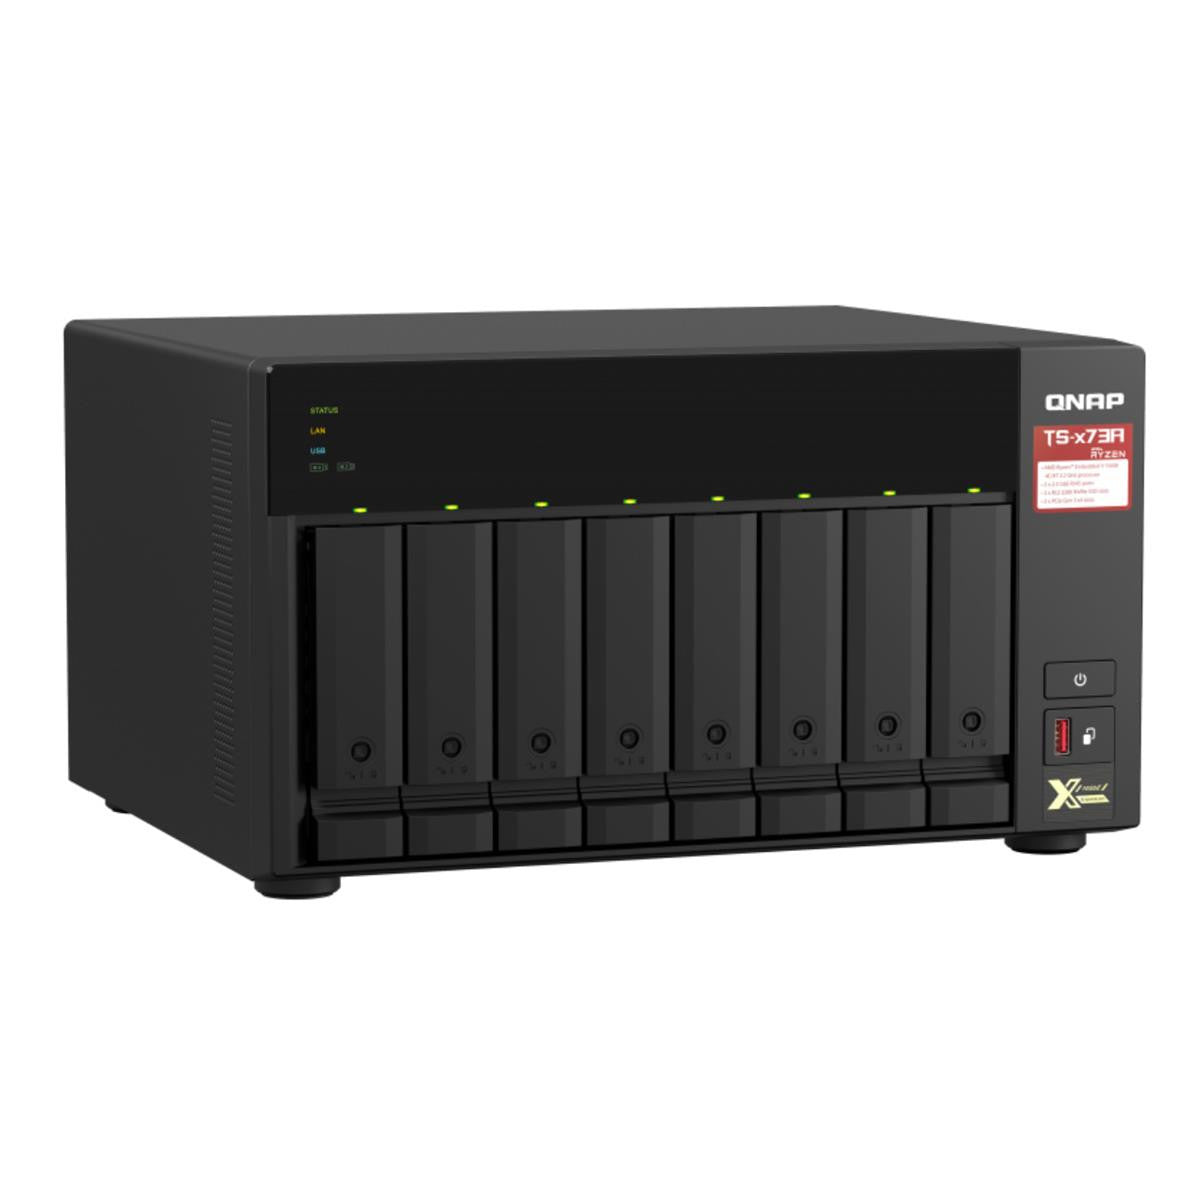 QNAP TS-873A 8-BAY NAS with 32GB DDR4 RAM and 64TB (8x8TB) Seagate Ironwolf NAS Drives Fully Assembled and Tested